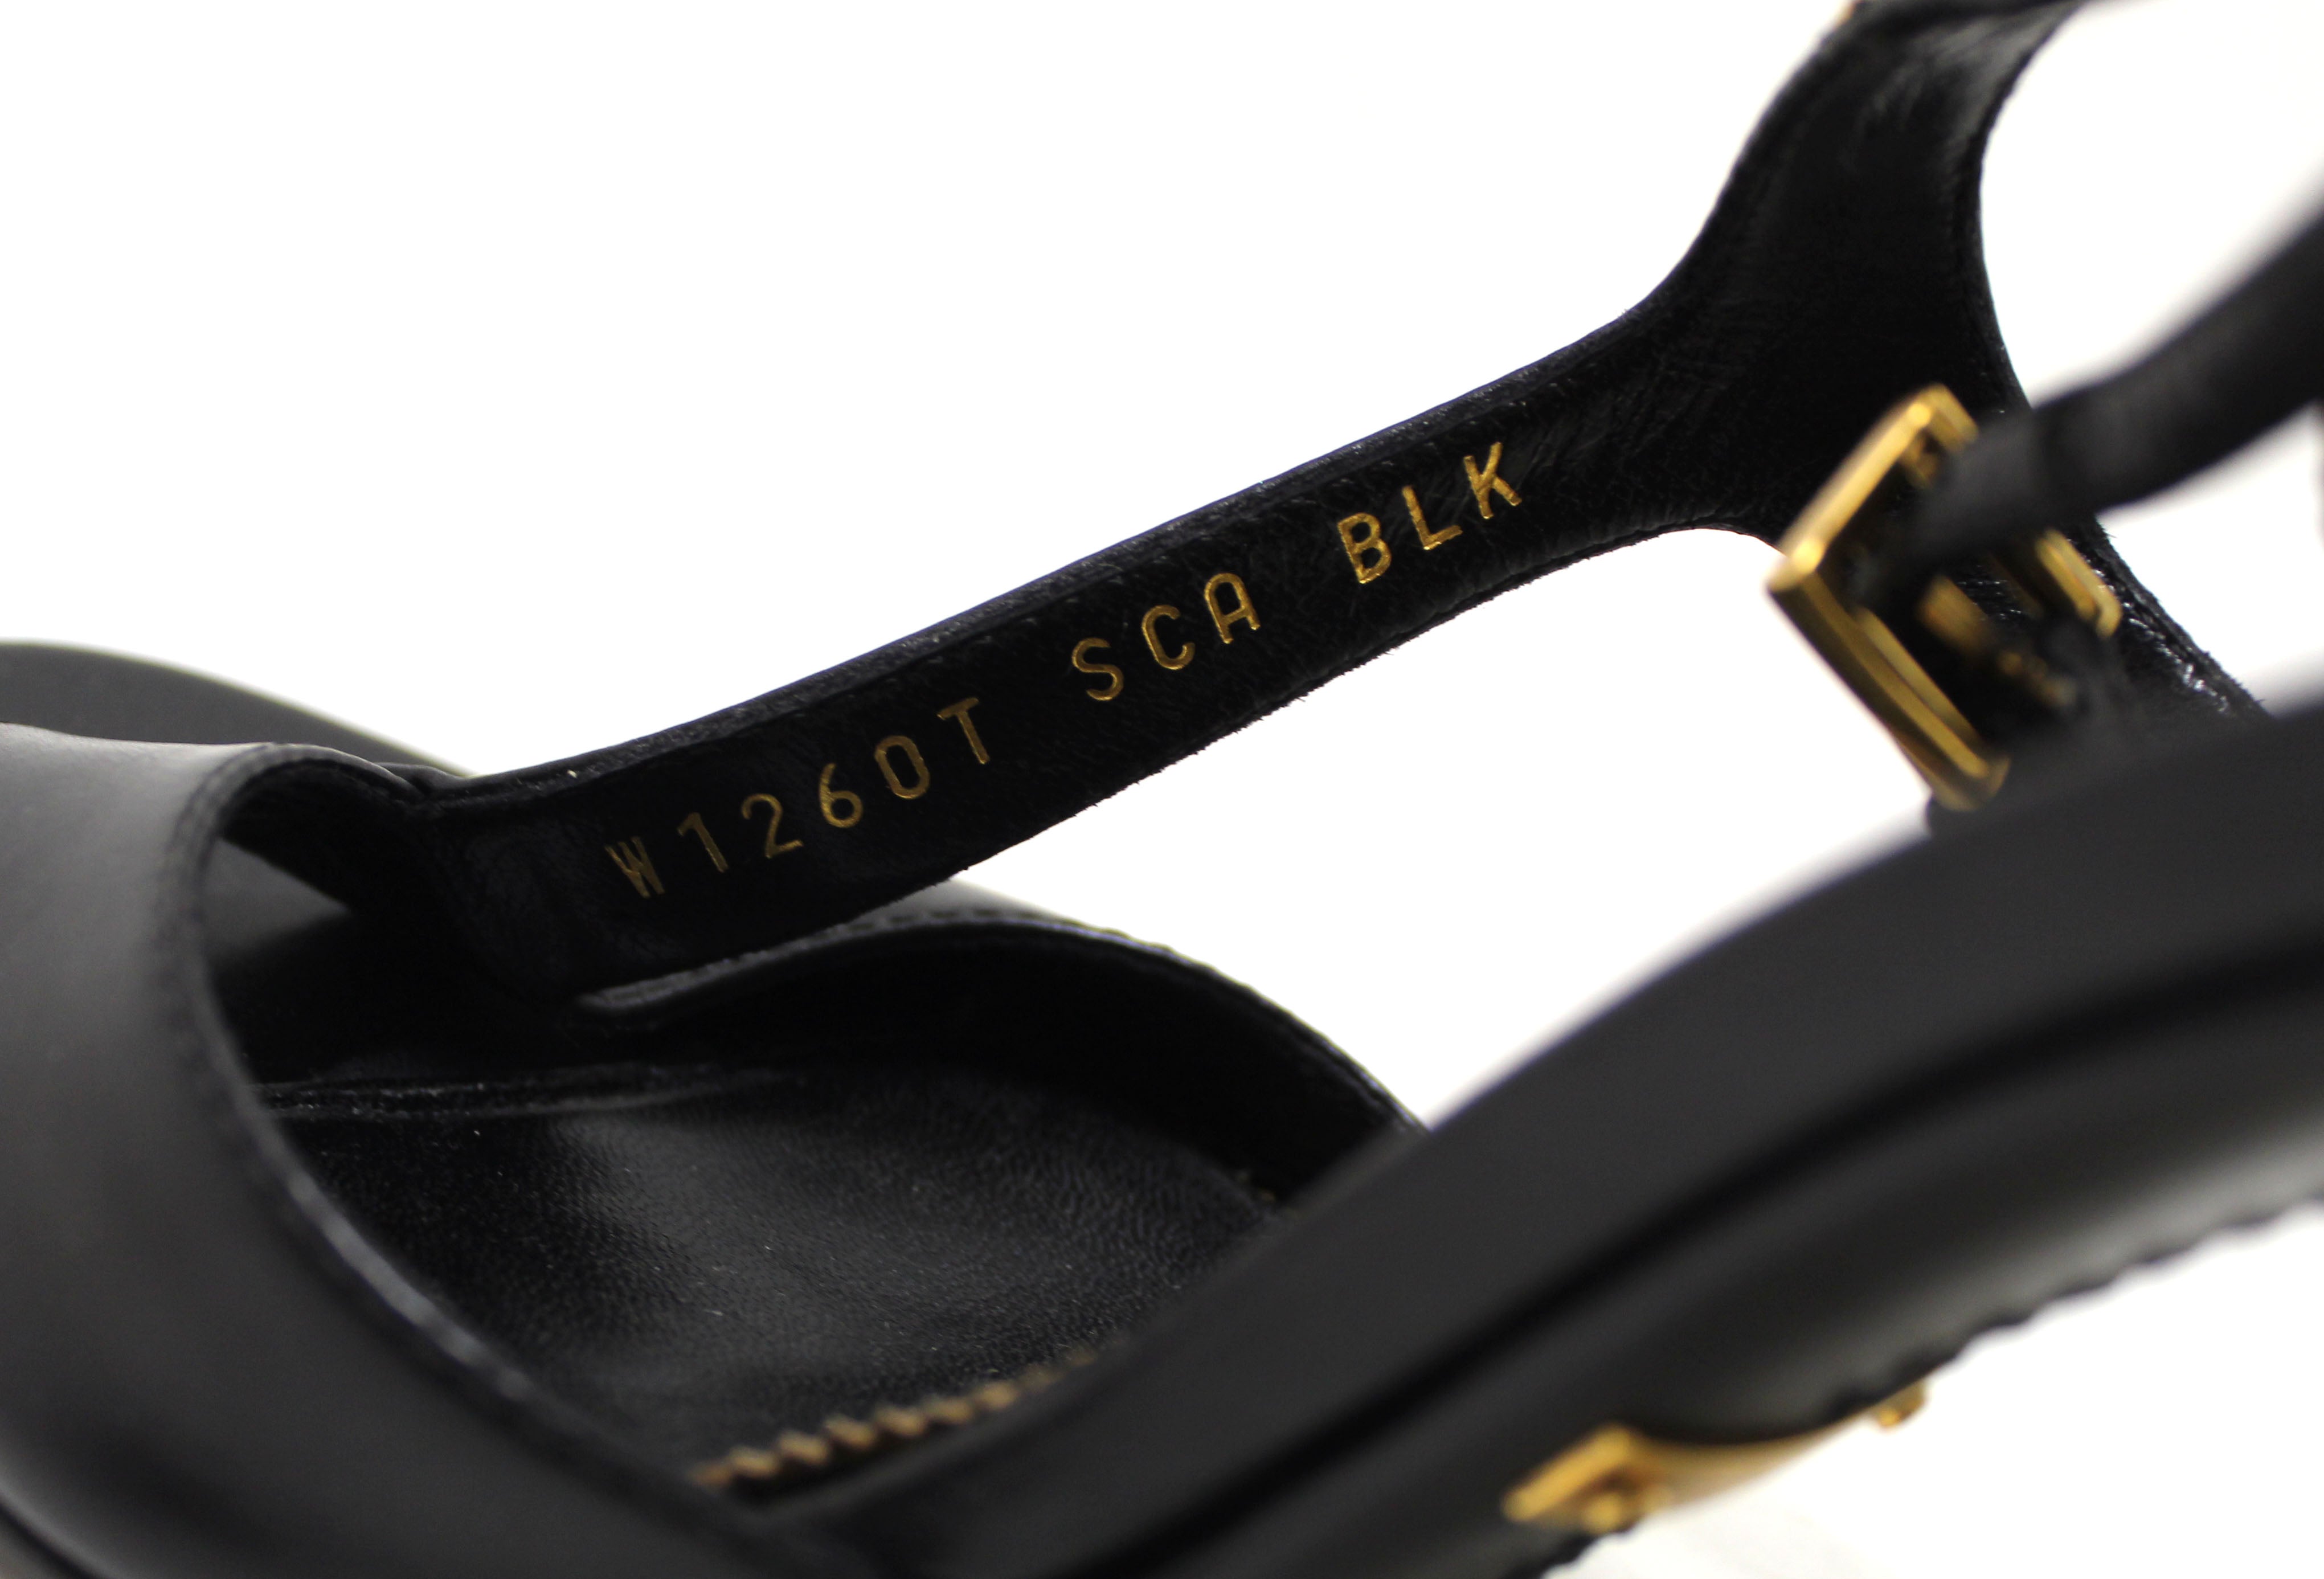 Authentic Tom Ford Black Leather and Gold Metal Strap Sandal Heels Size 36.5